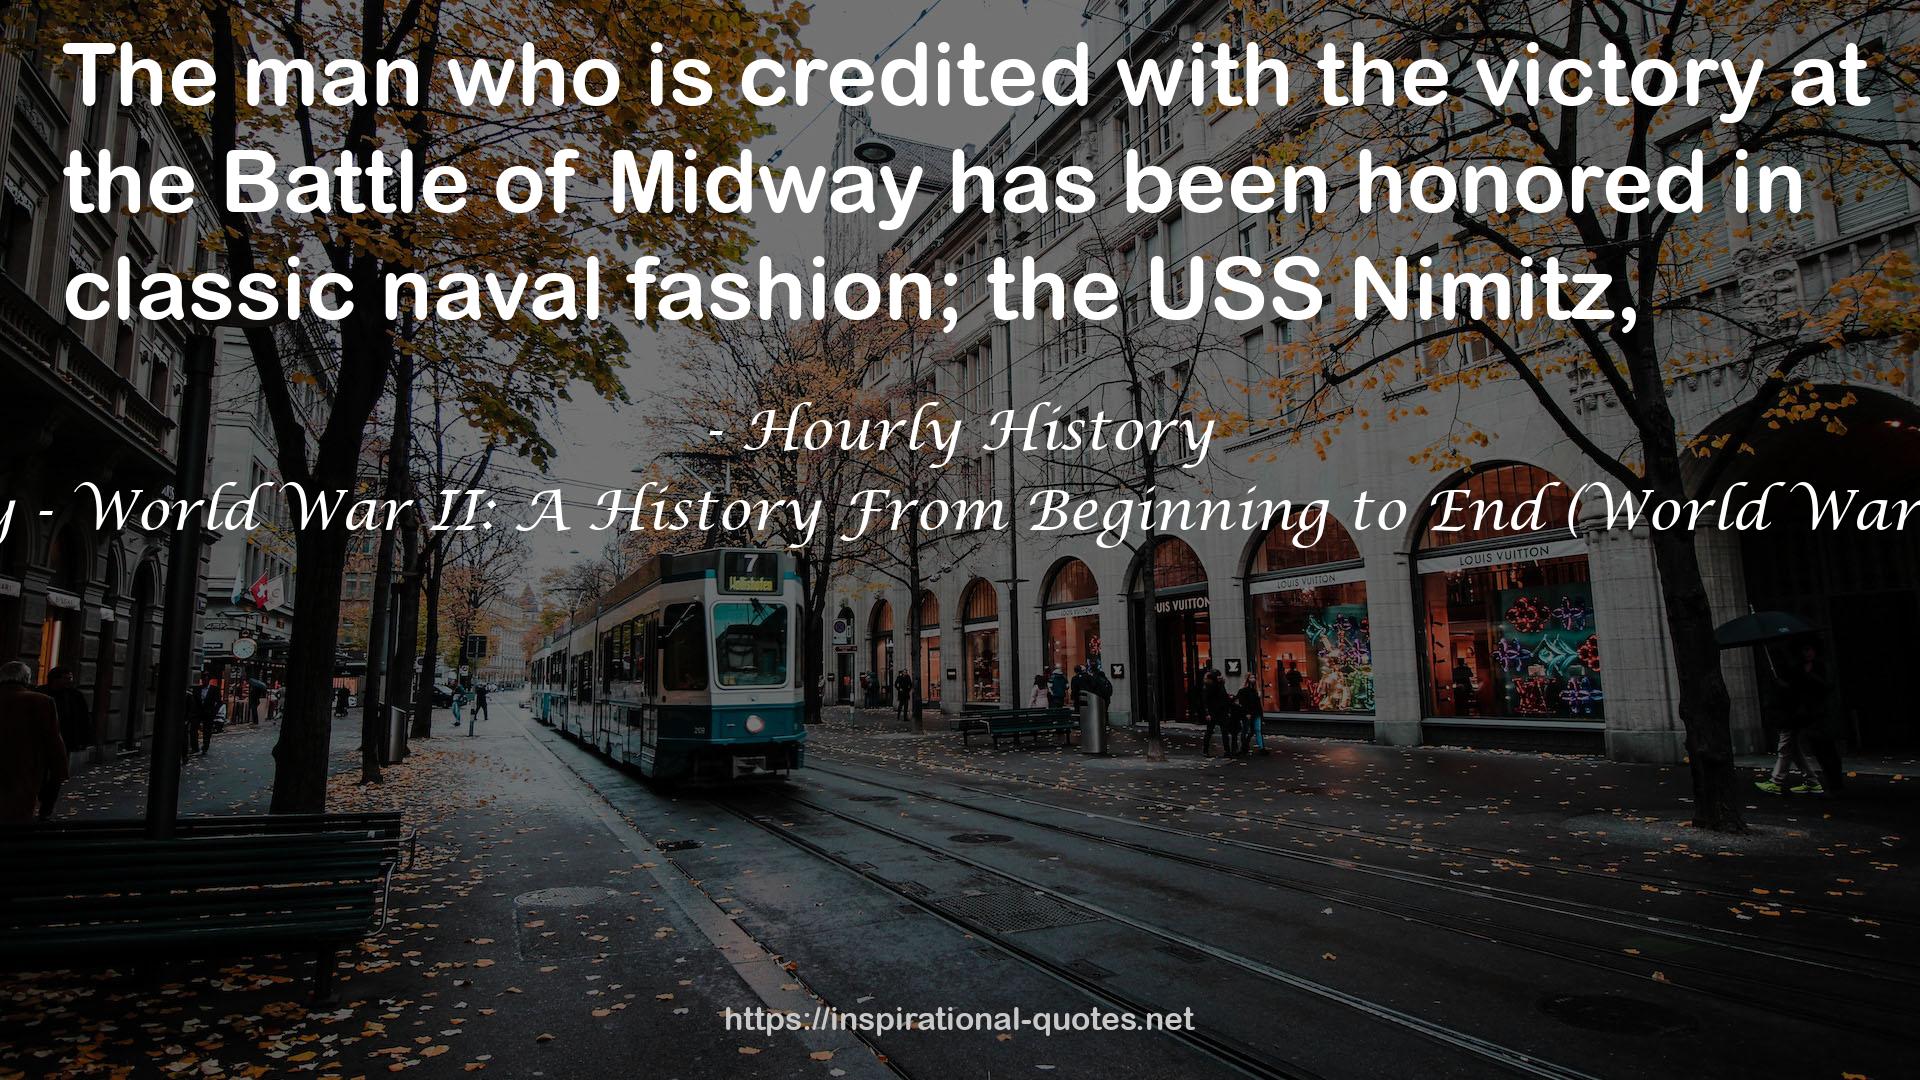 Battle of Midway - World War II: A History From Beginning to End (World War 2 Battles Book 7) QUOTES